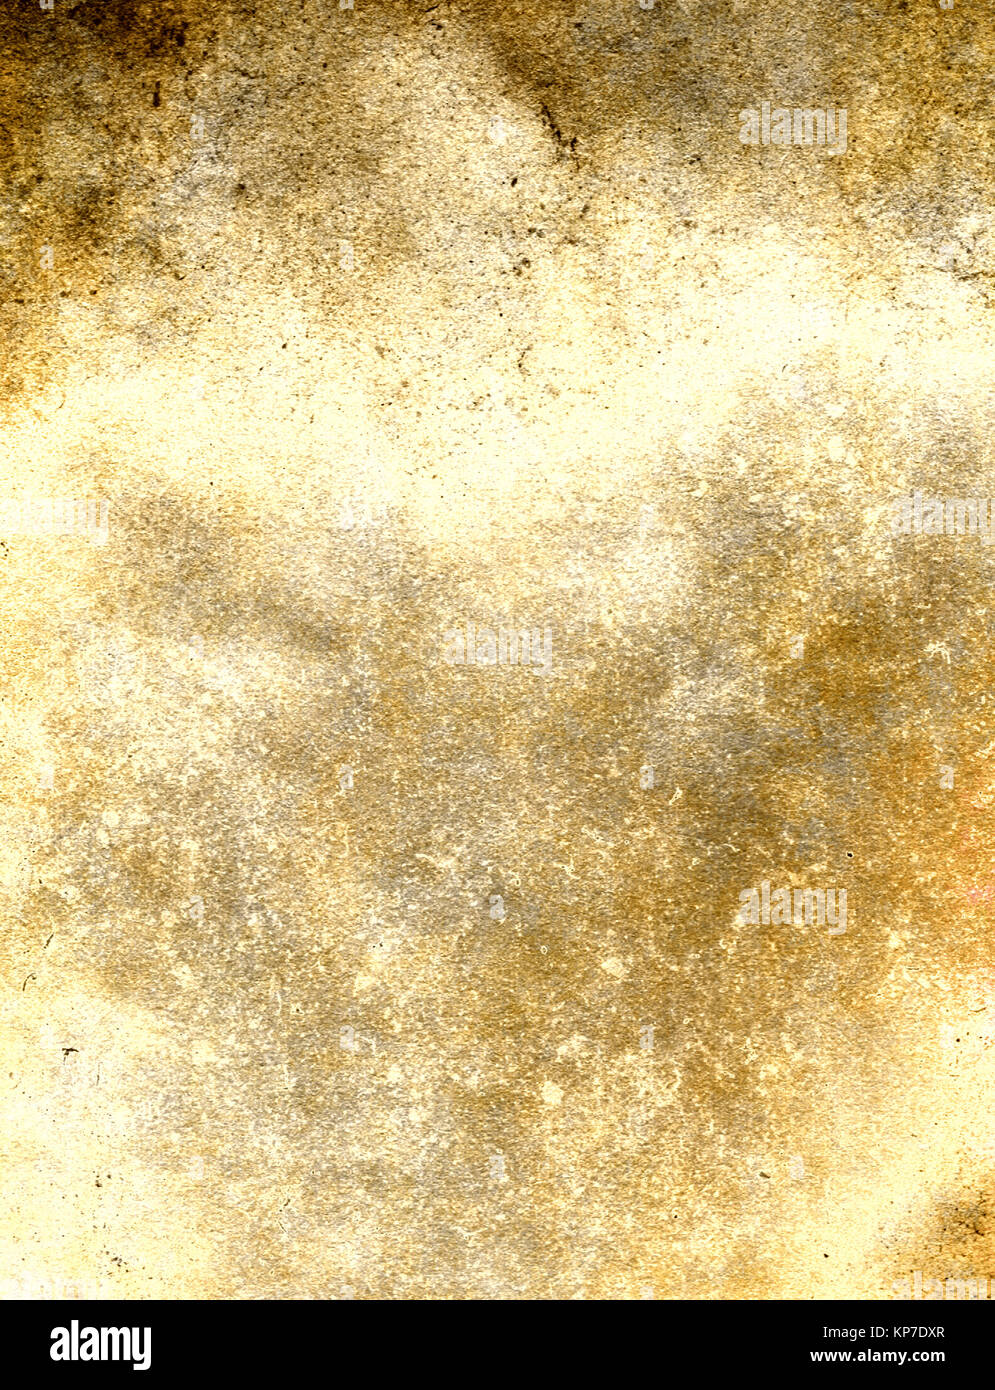 Old grunge paper texture for the design. Natural grunge paper material. Stock Photo